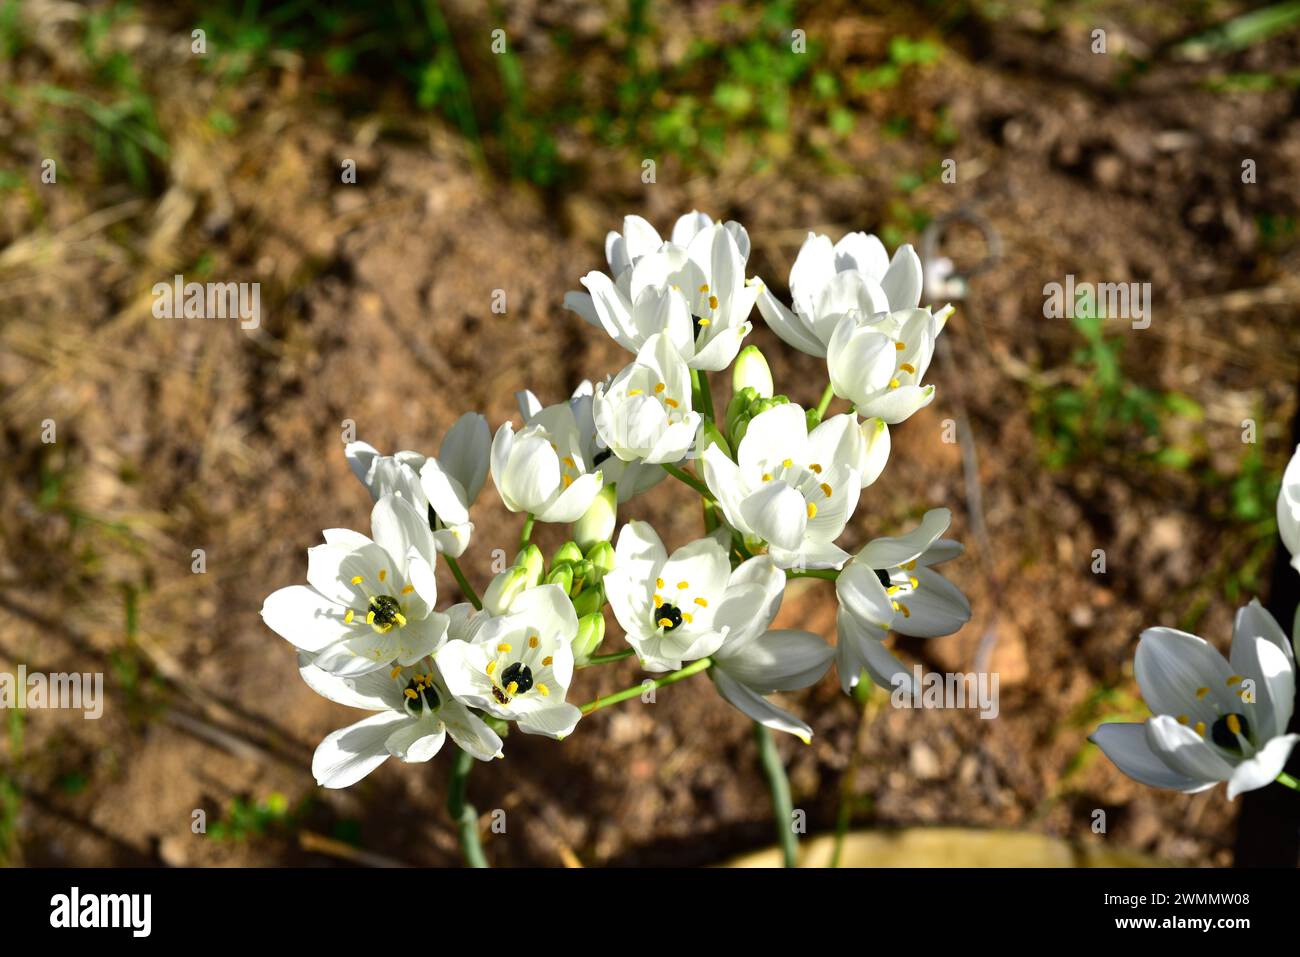 Arab's eye or Arabian starflower (Ornithogalum arabicum) is a perennial herb native to northern Africa and southern Europe. Flowers detail. Stock Photo